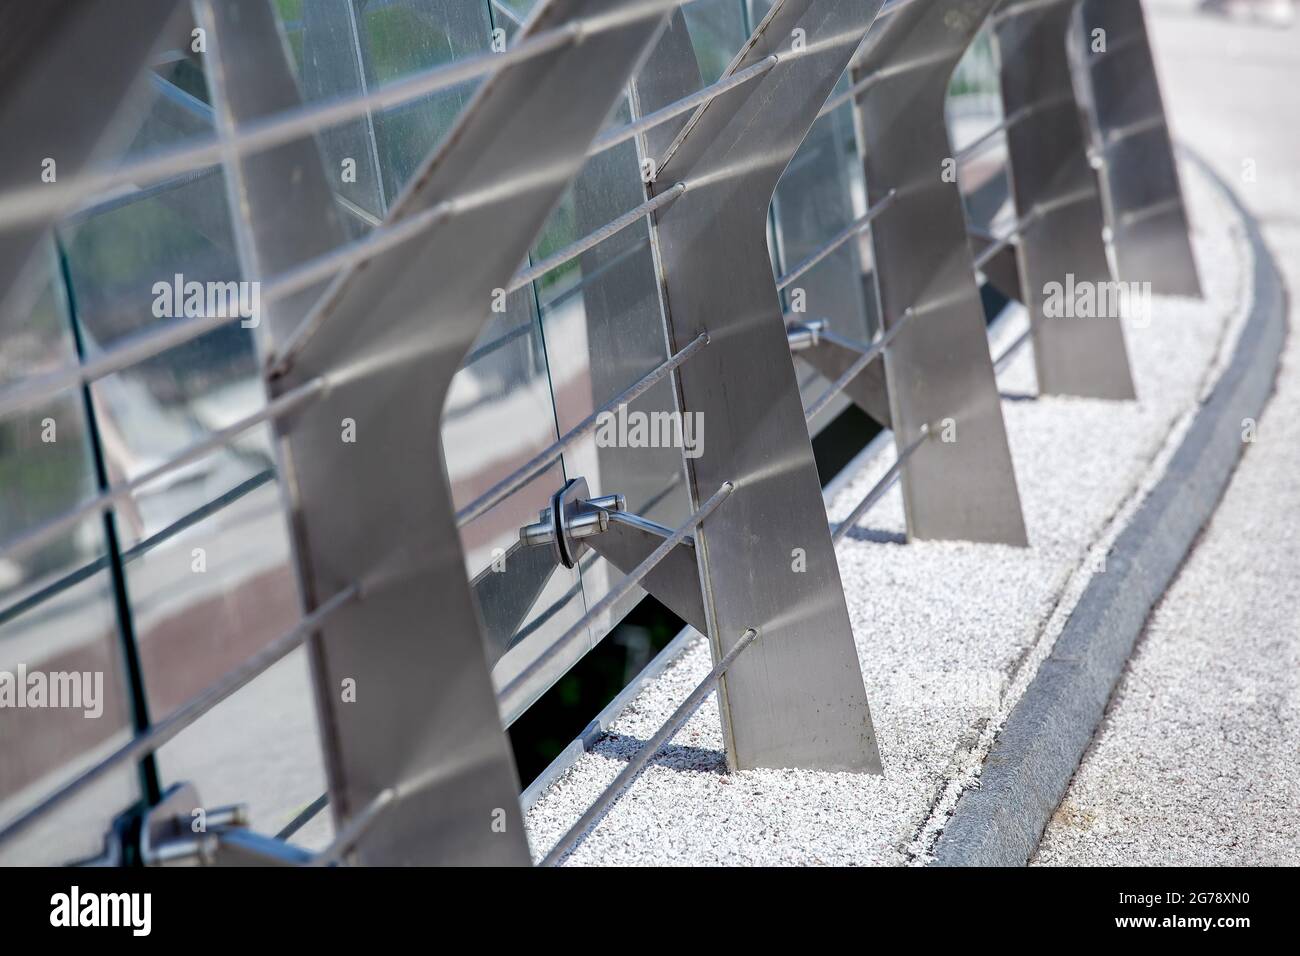 metal turnbuckles fastening of cables with steel rod on pedestrian bridge with stone pebble path and glass barrier for safety close-up details of cons Stock Photo